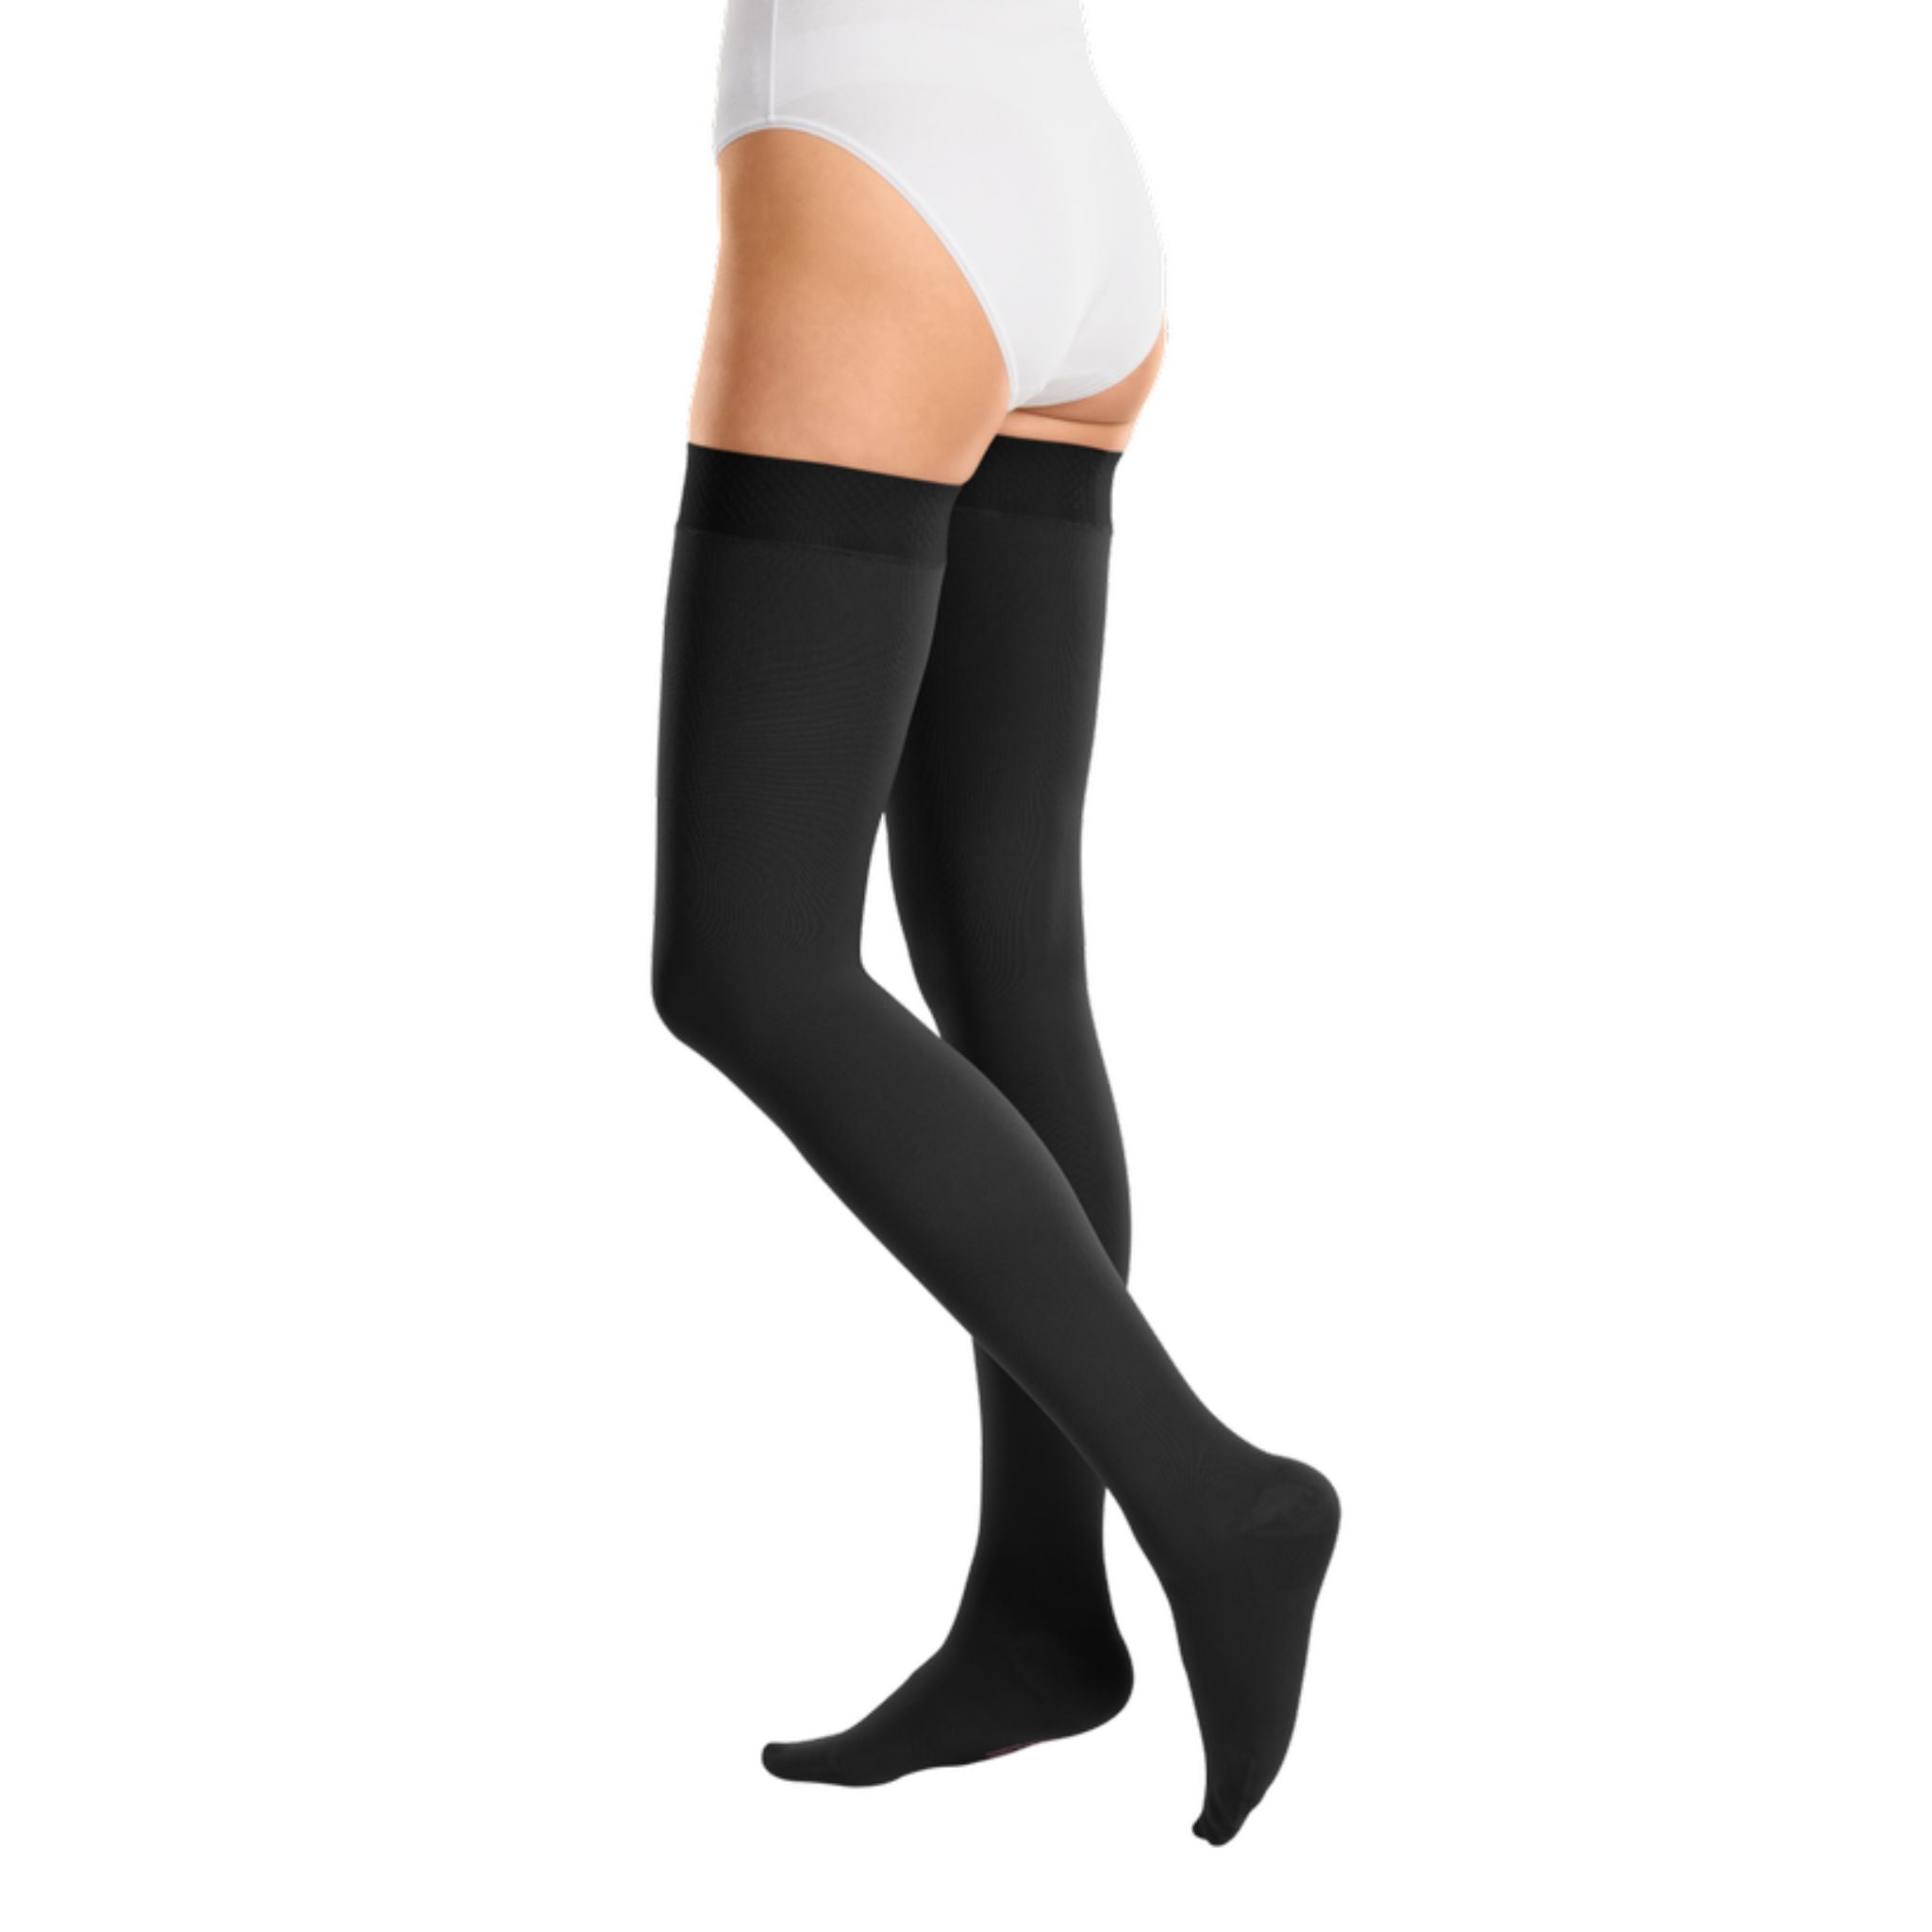 Compression Stockings | Thigh High | Closed Toe | Sensitive Topband | Black | mediven cotton